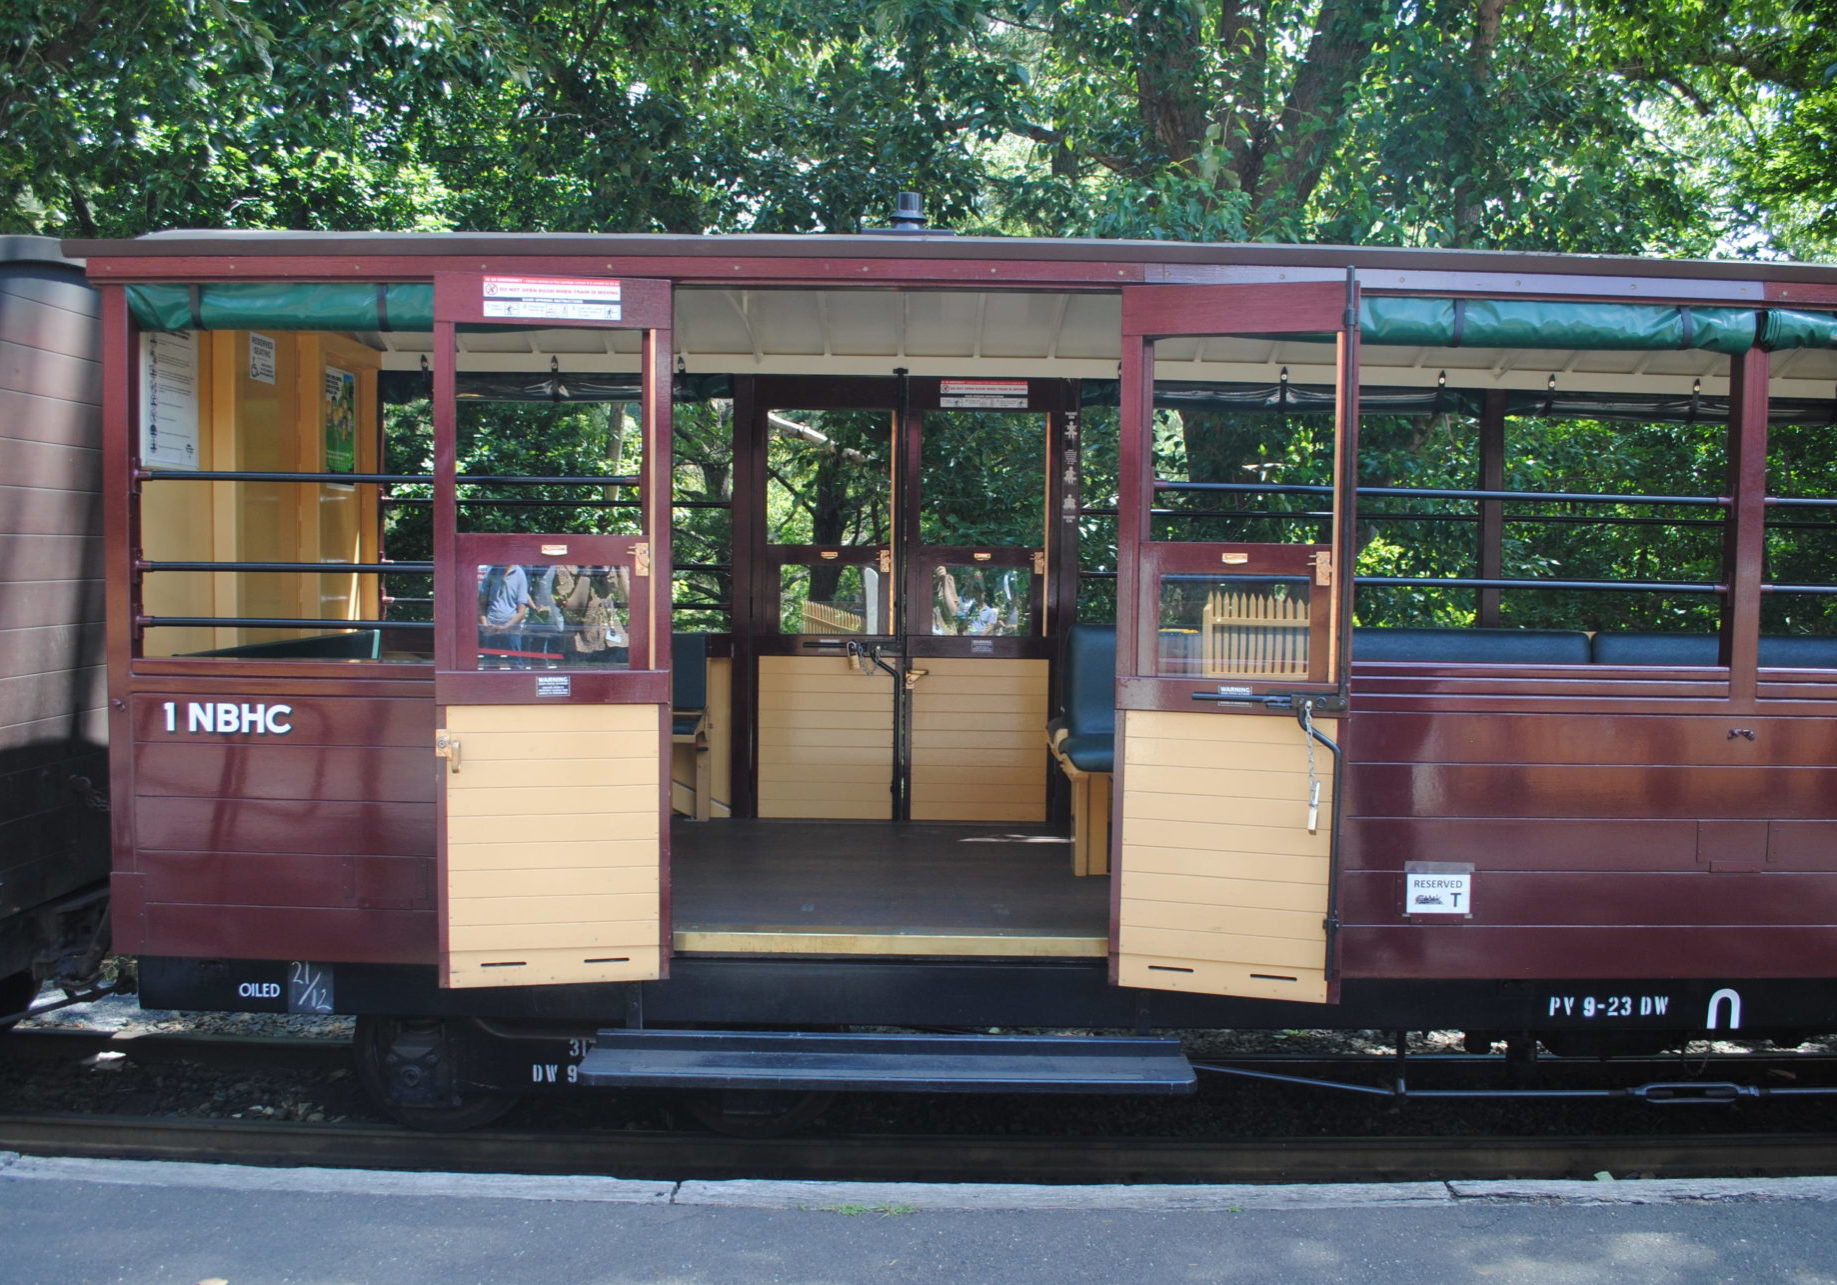 Accessible carriage with double doors. The doors are open and the carriage is located at a Puffing Billy platform.